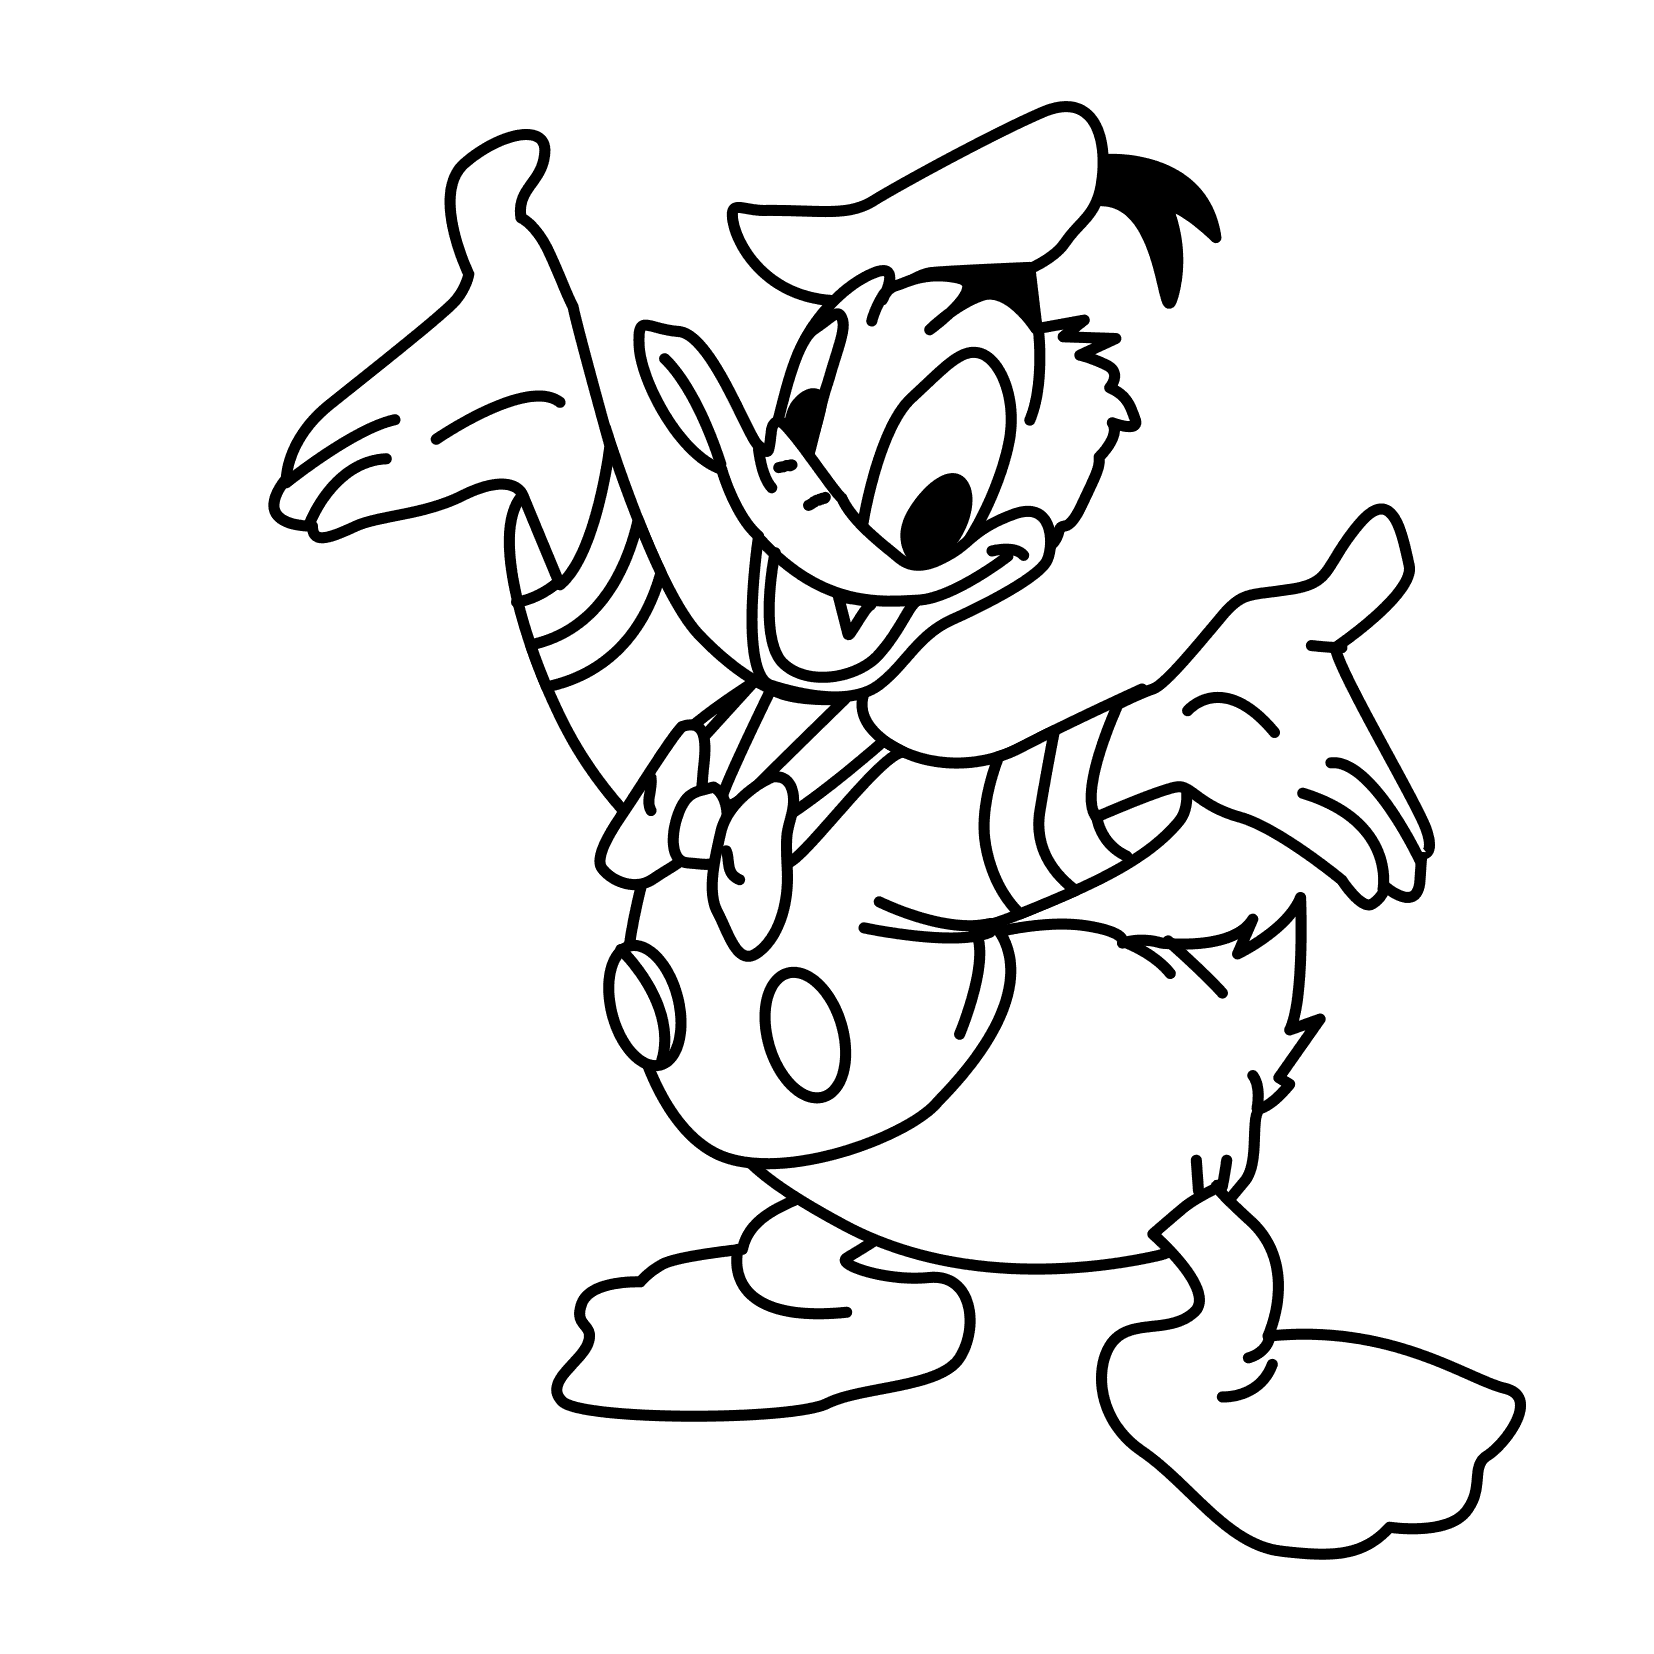 Donald Duck Line Drawing | Line Drawing